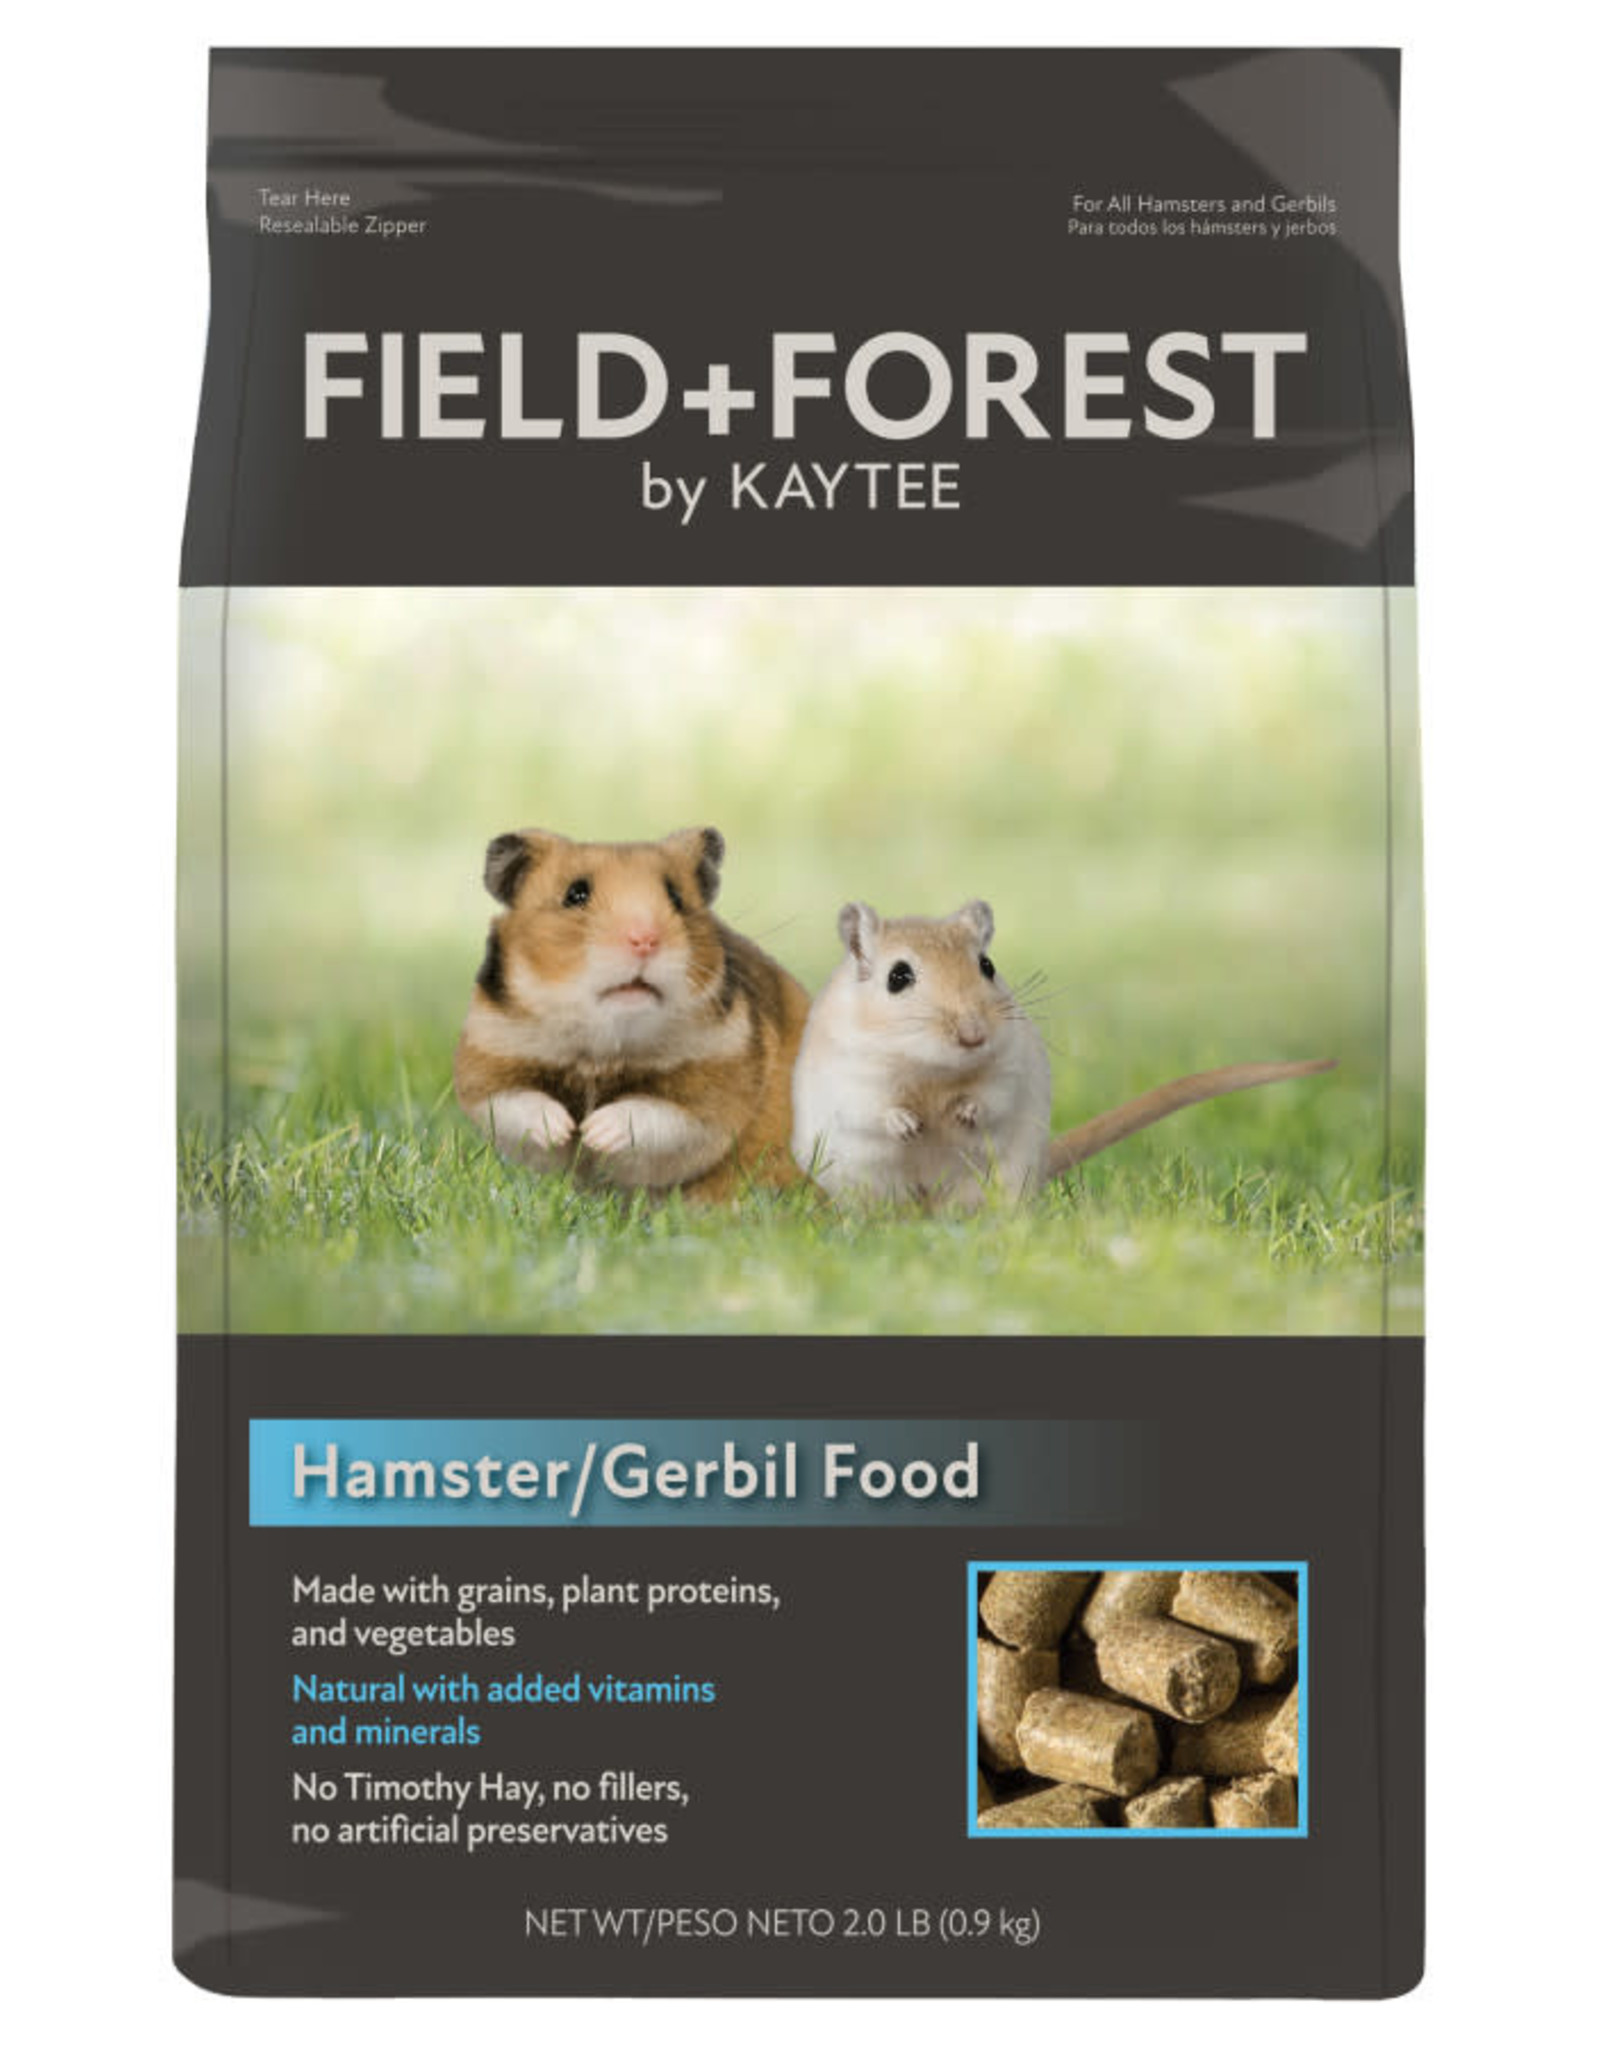 KAYTEE PRODUCTS KAY Field+Forest Hamster or Gerbil Food 2lb